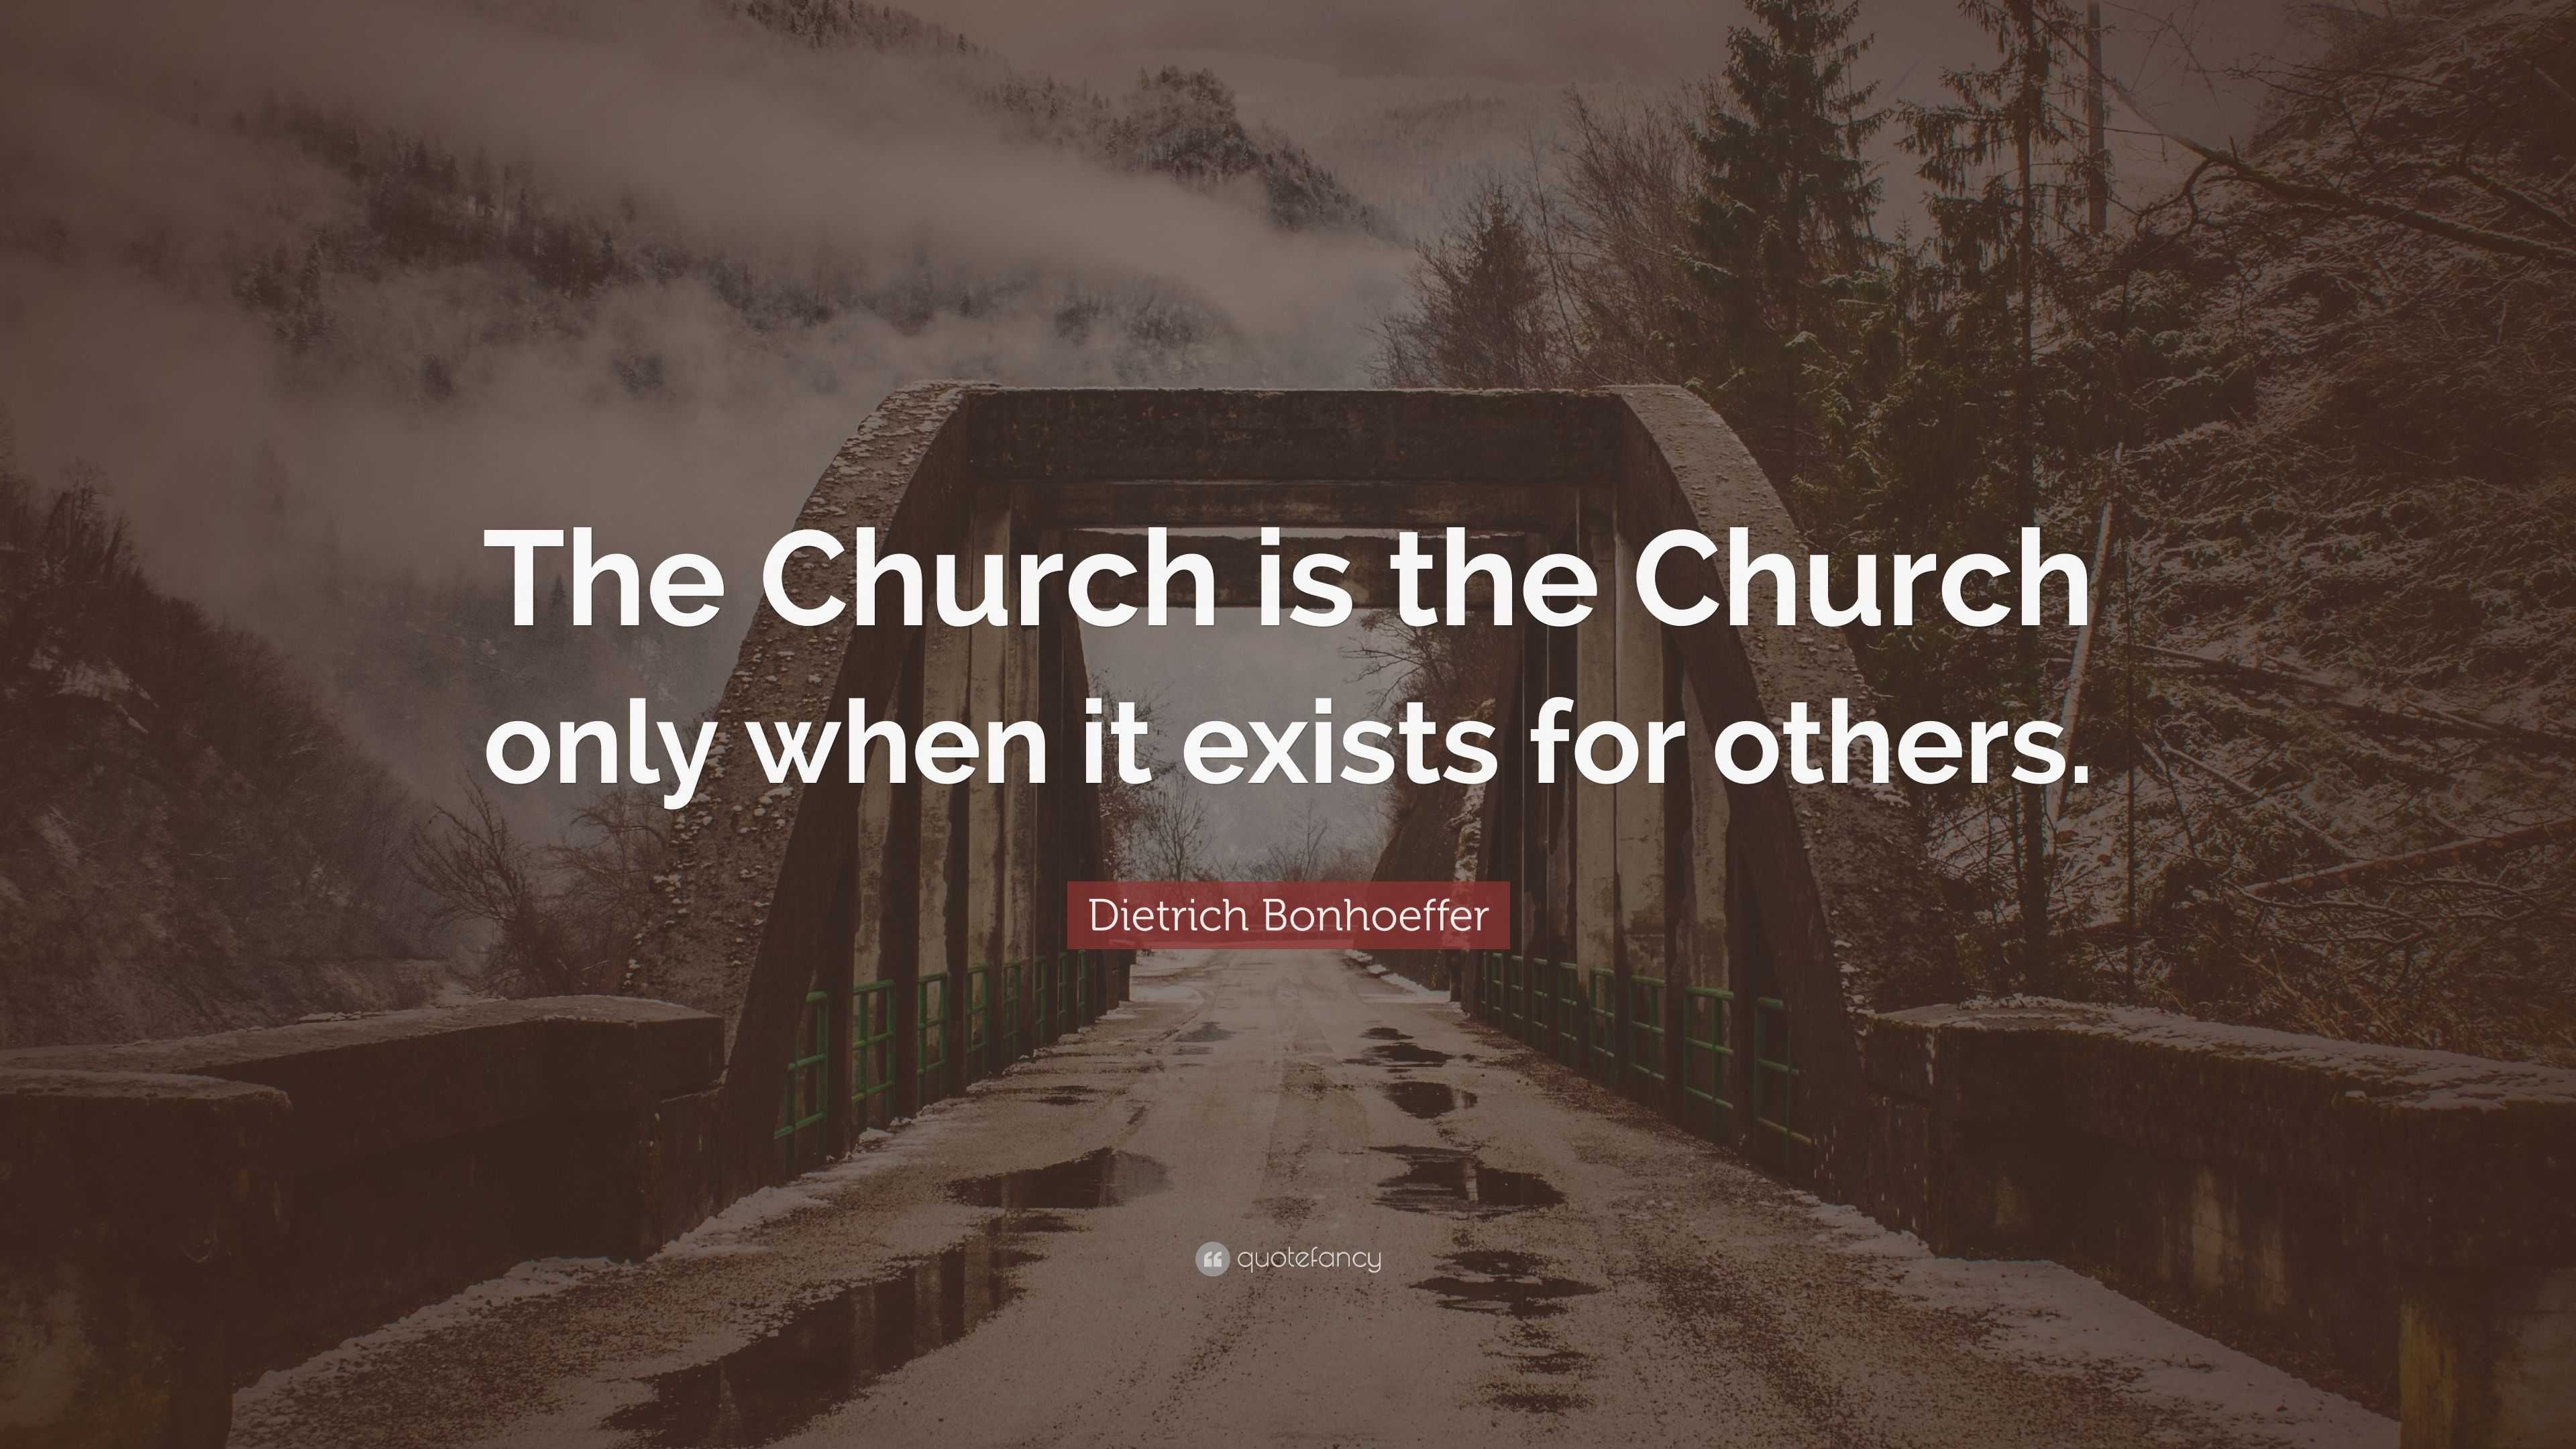 Dietrich Bonhoeffer Quote “The Church is the Church only